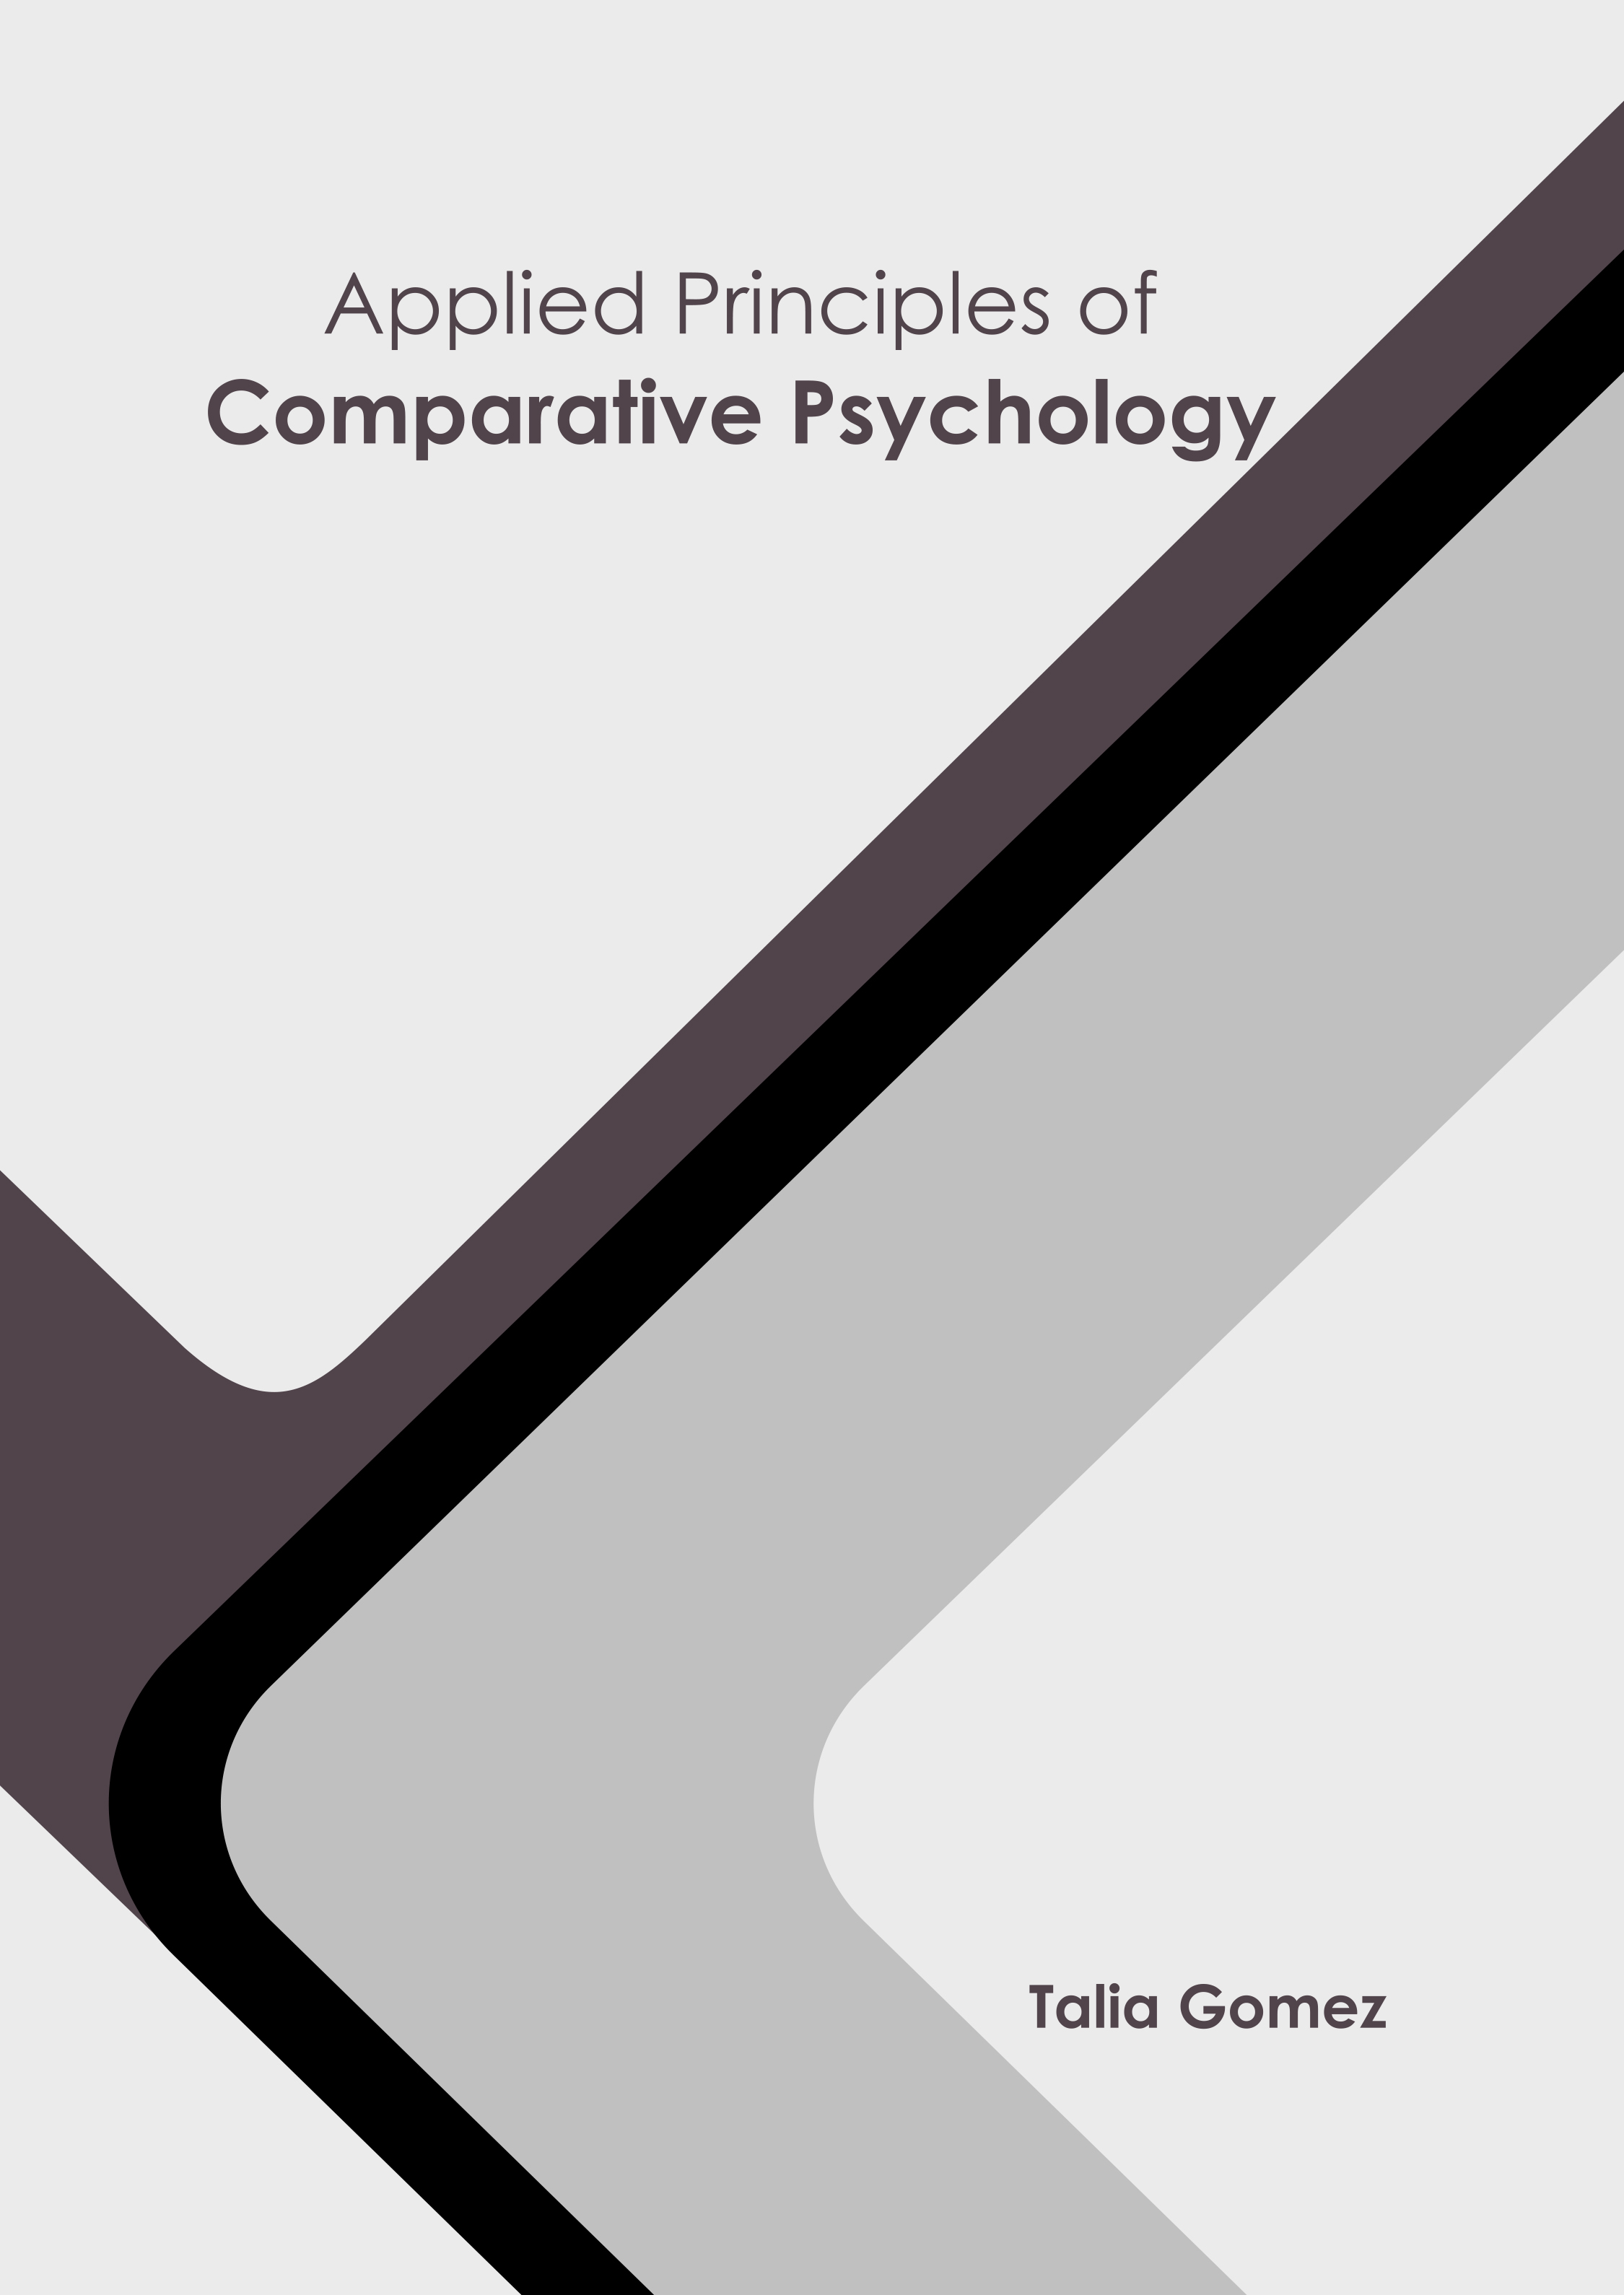 APPLIED PRINCIPLES OF COMPARATIVE PSYCHOLOGY